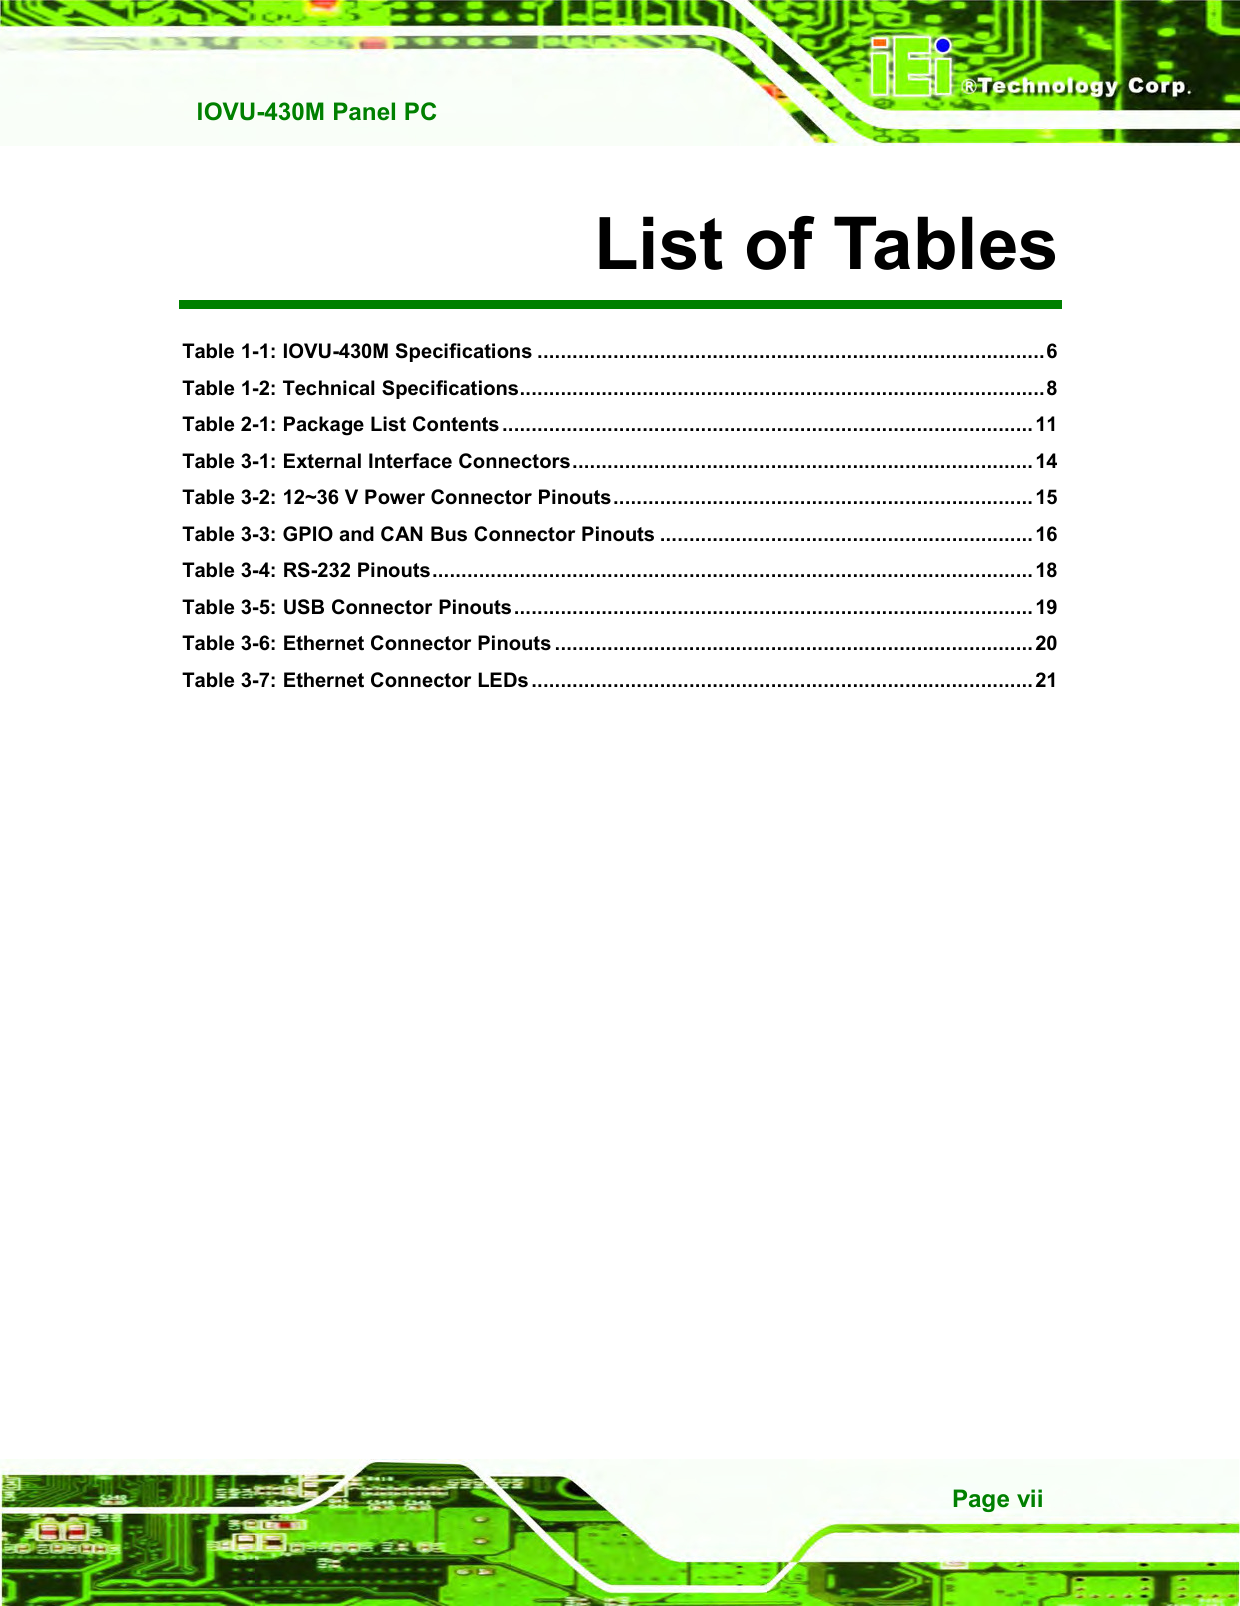   IOVU-430M Panel PC Page vii List of Tables Table 1-1: IOVU-430M Specifications .......................................................................................6 Table 1-2: Technical Specifications..........................................................................................8 Table 2-1: Package List Contents ........................................................................................... 11 Table 3-1: External Interface Connectors............................................................................... 14 Table 3-2: 12~36 V Power Connector Pinouts........................................................................ 15 Table 3-3: GPIO and CAN Bus Connector Pinouts ................................................................ 16 Table 3-4: RS-232 Pinouts....................................................................................................... 18 Table 3-5: USB Connector Pinouts......................................................................................... 19 Table 3-6: Ethernet Connector Pinouts .................................................................................. 20 Table 3-7: Ethernet Connector LEDs ......................................................................................21    